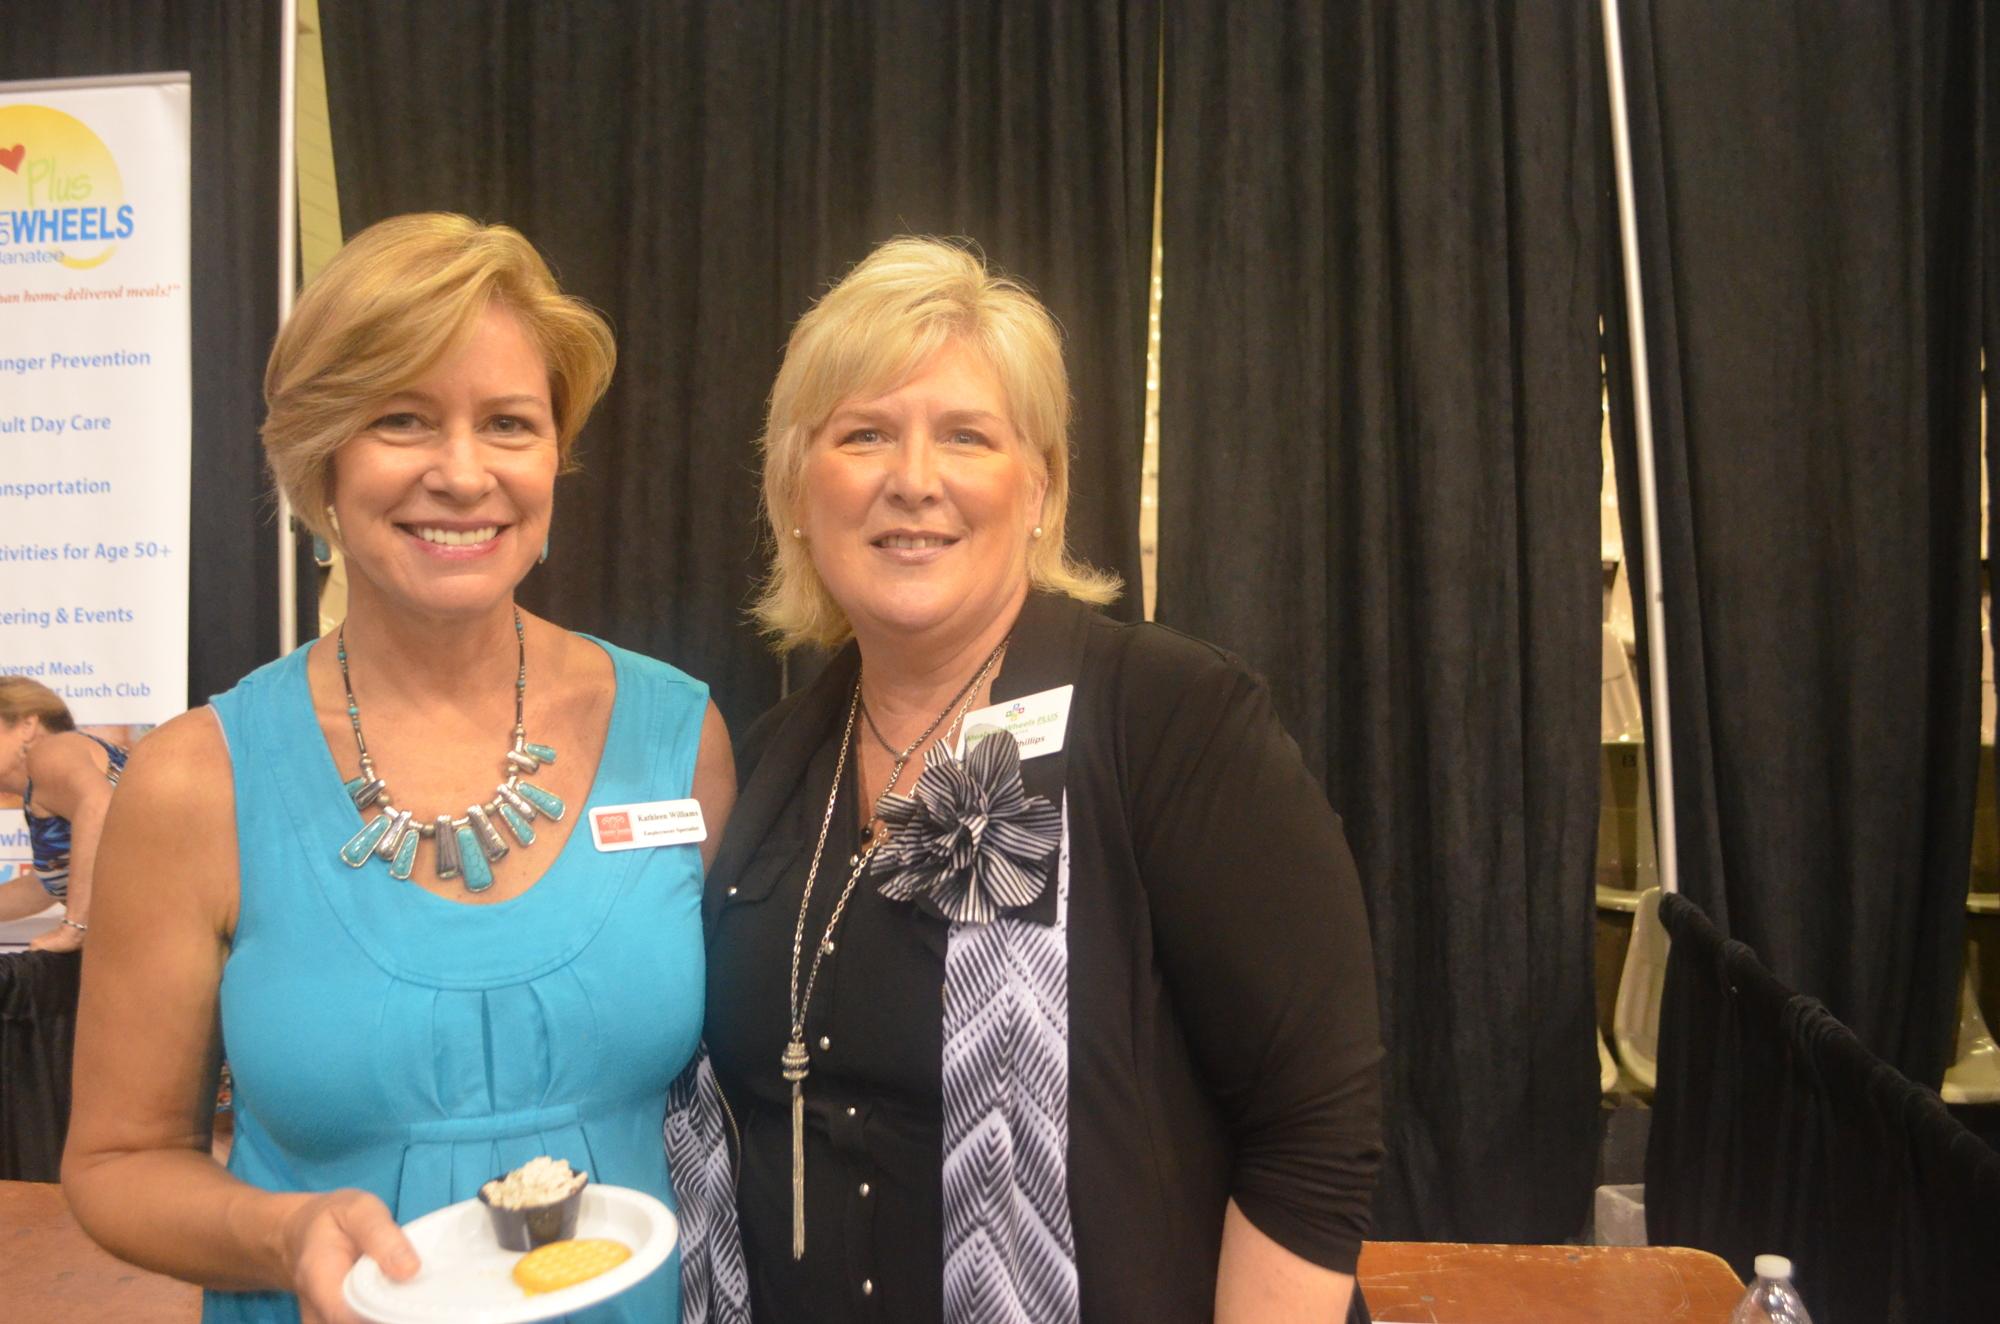 Kathleen Williams and Maribeth Phillips at last year's event.